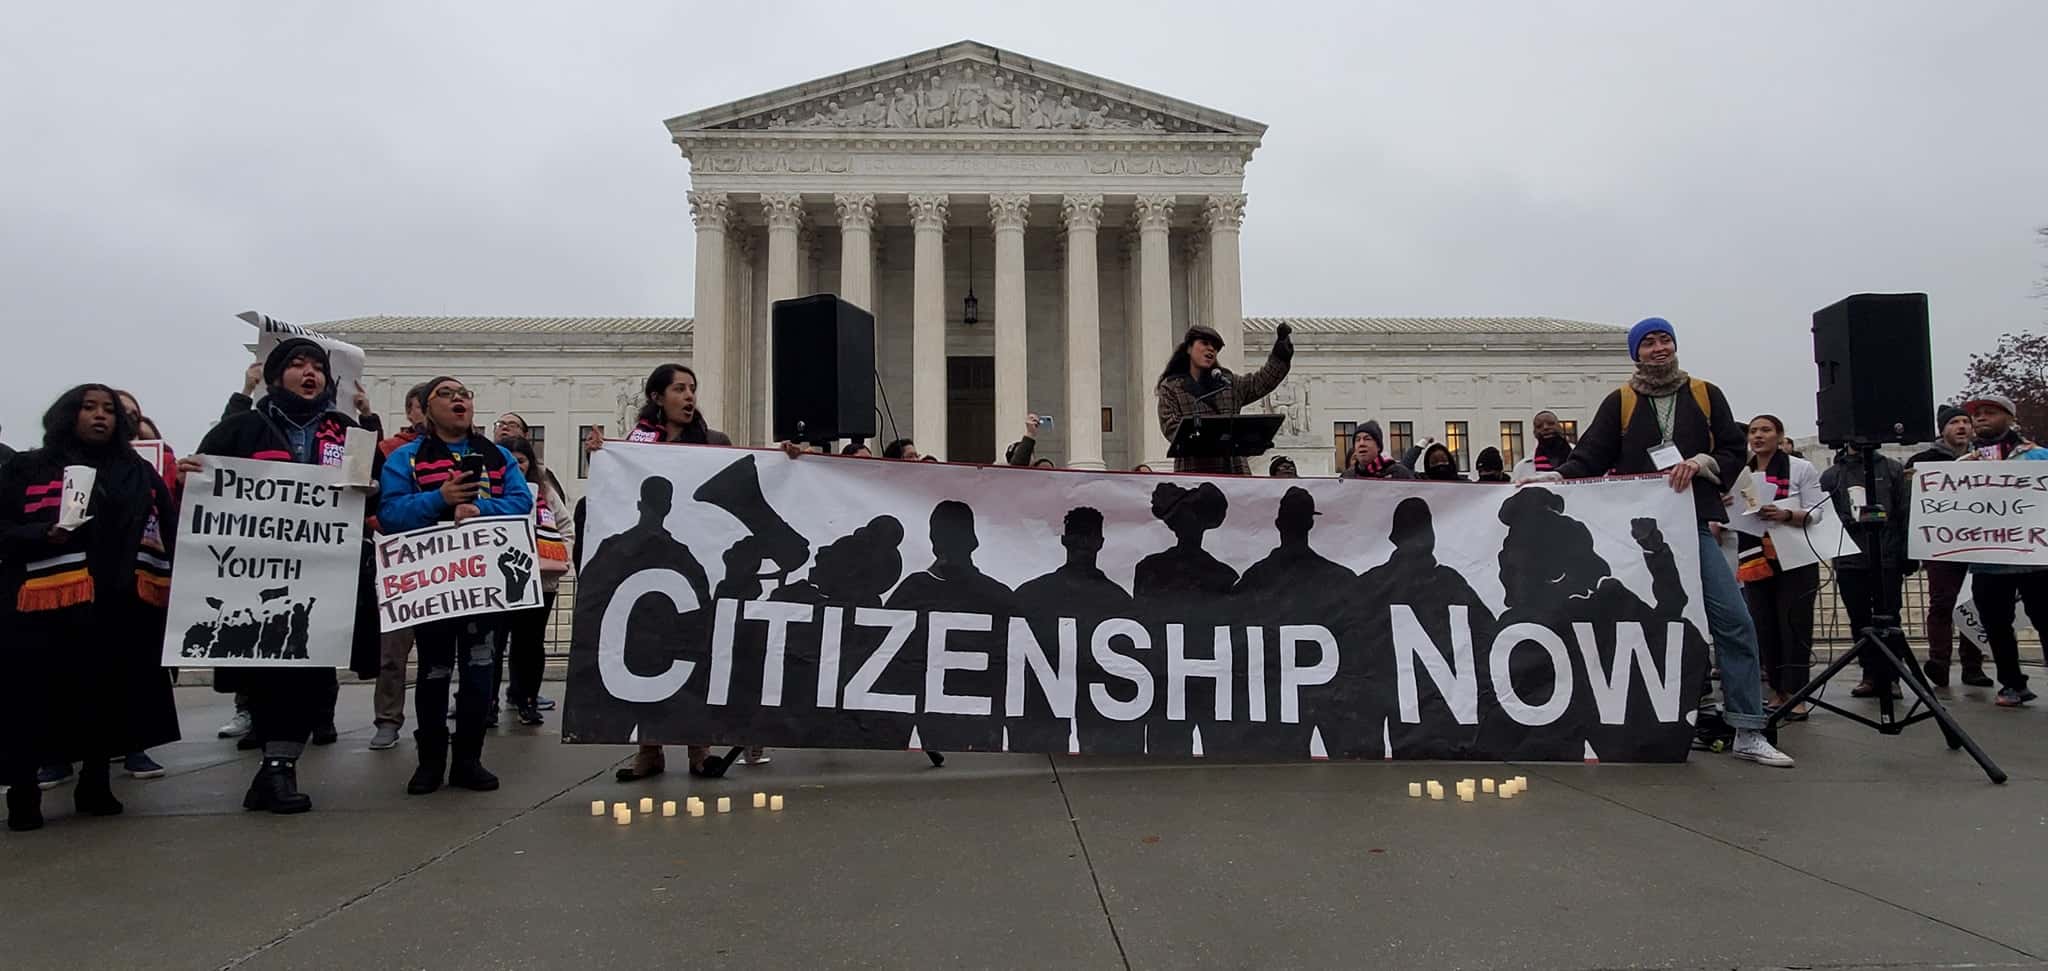 A group of people standing in front of a government building, holding a sign that reads "Citizenship Now."